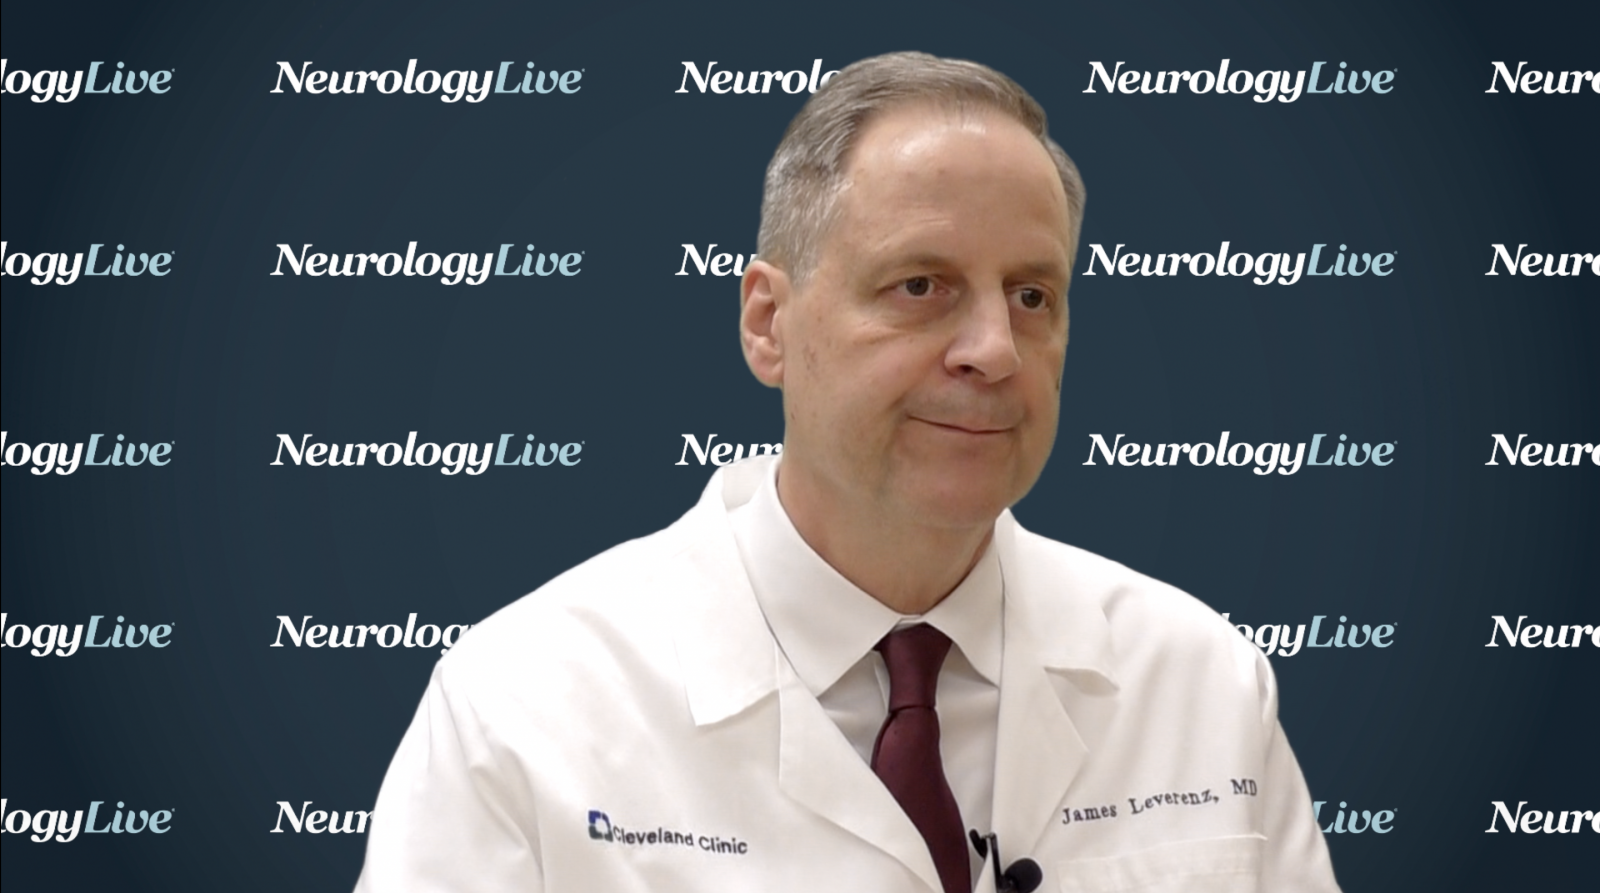 James Leverenz, MD: Biomarkers for Dementia With Lewy Bodies